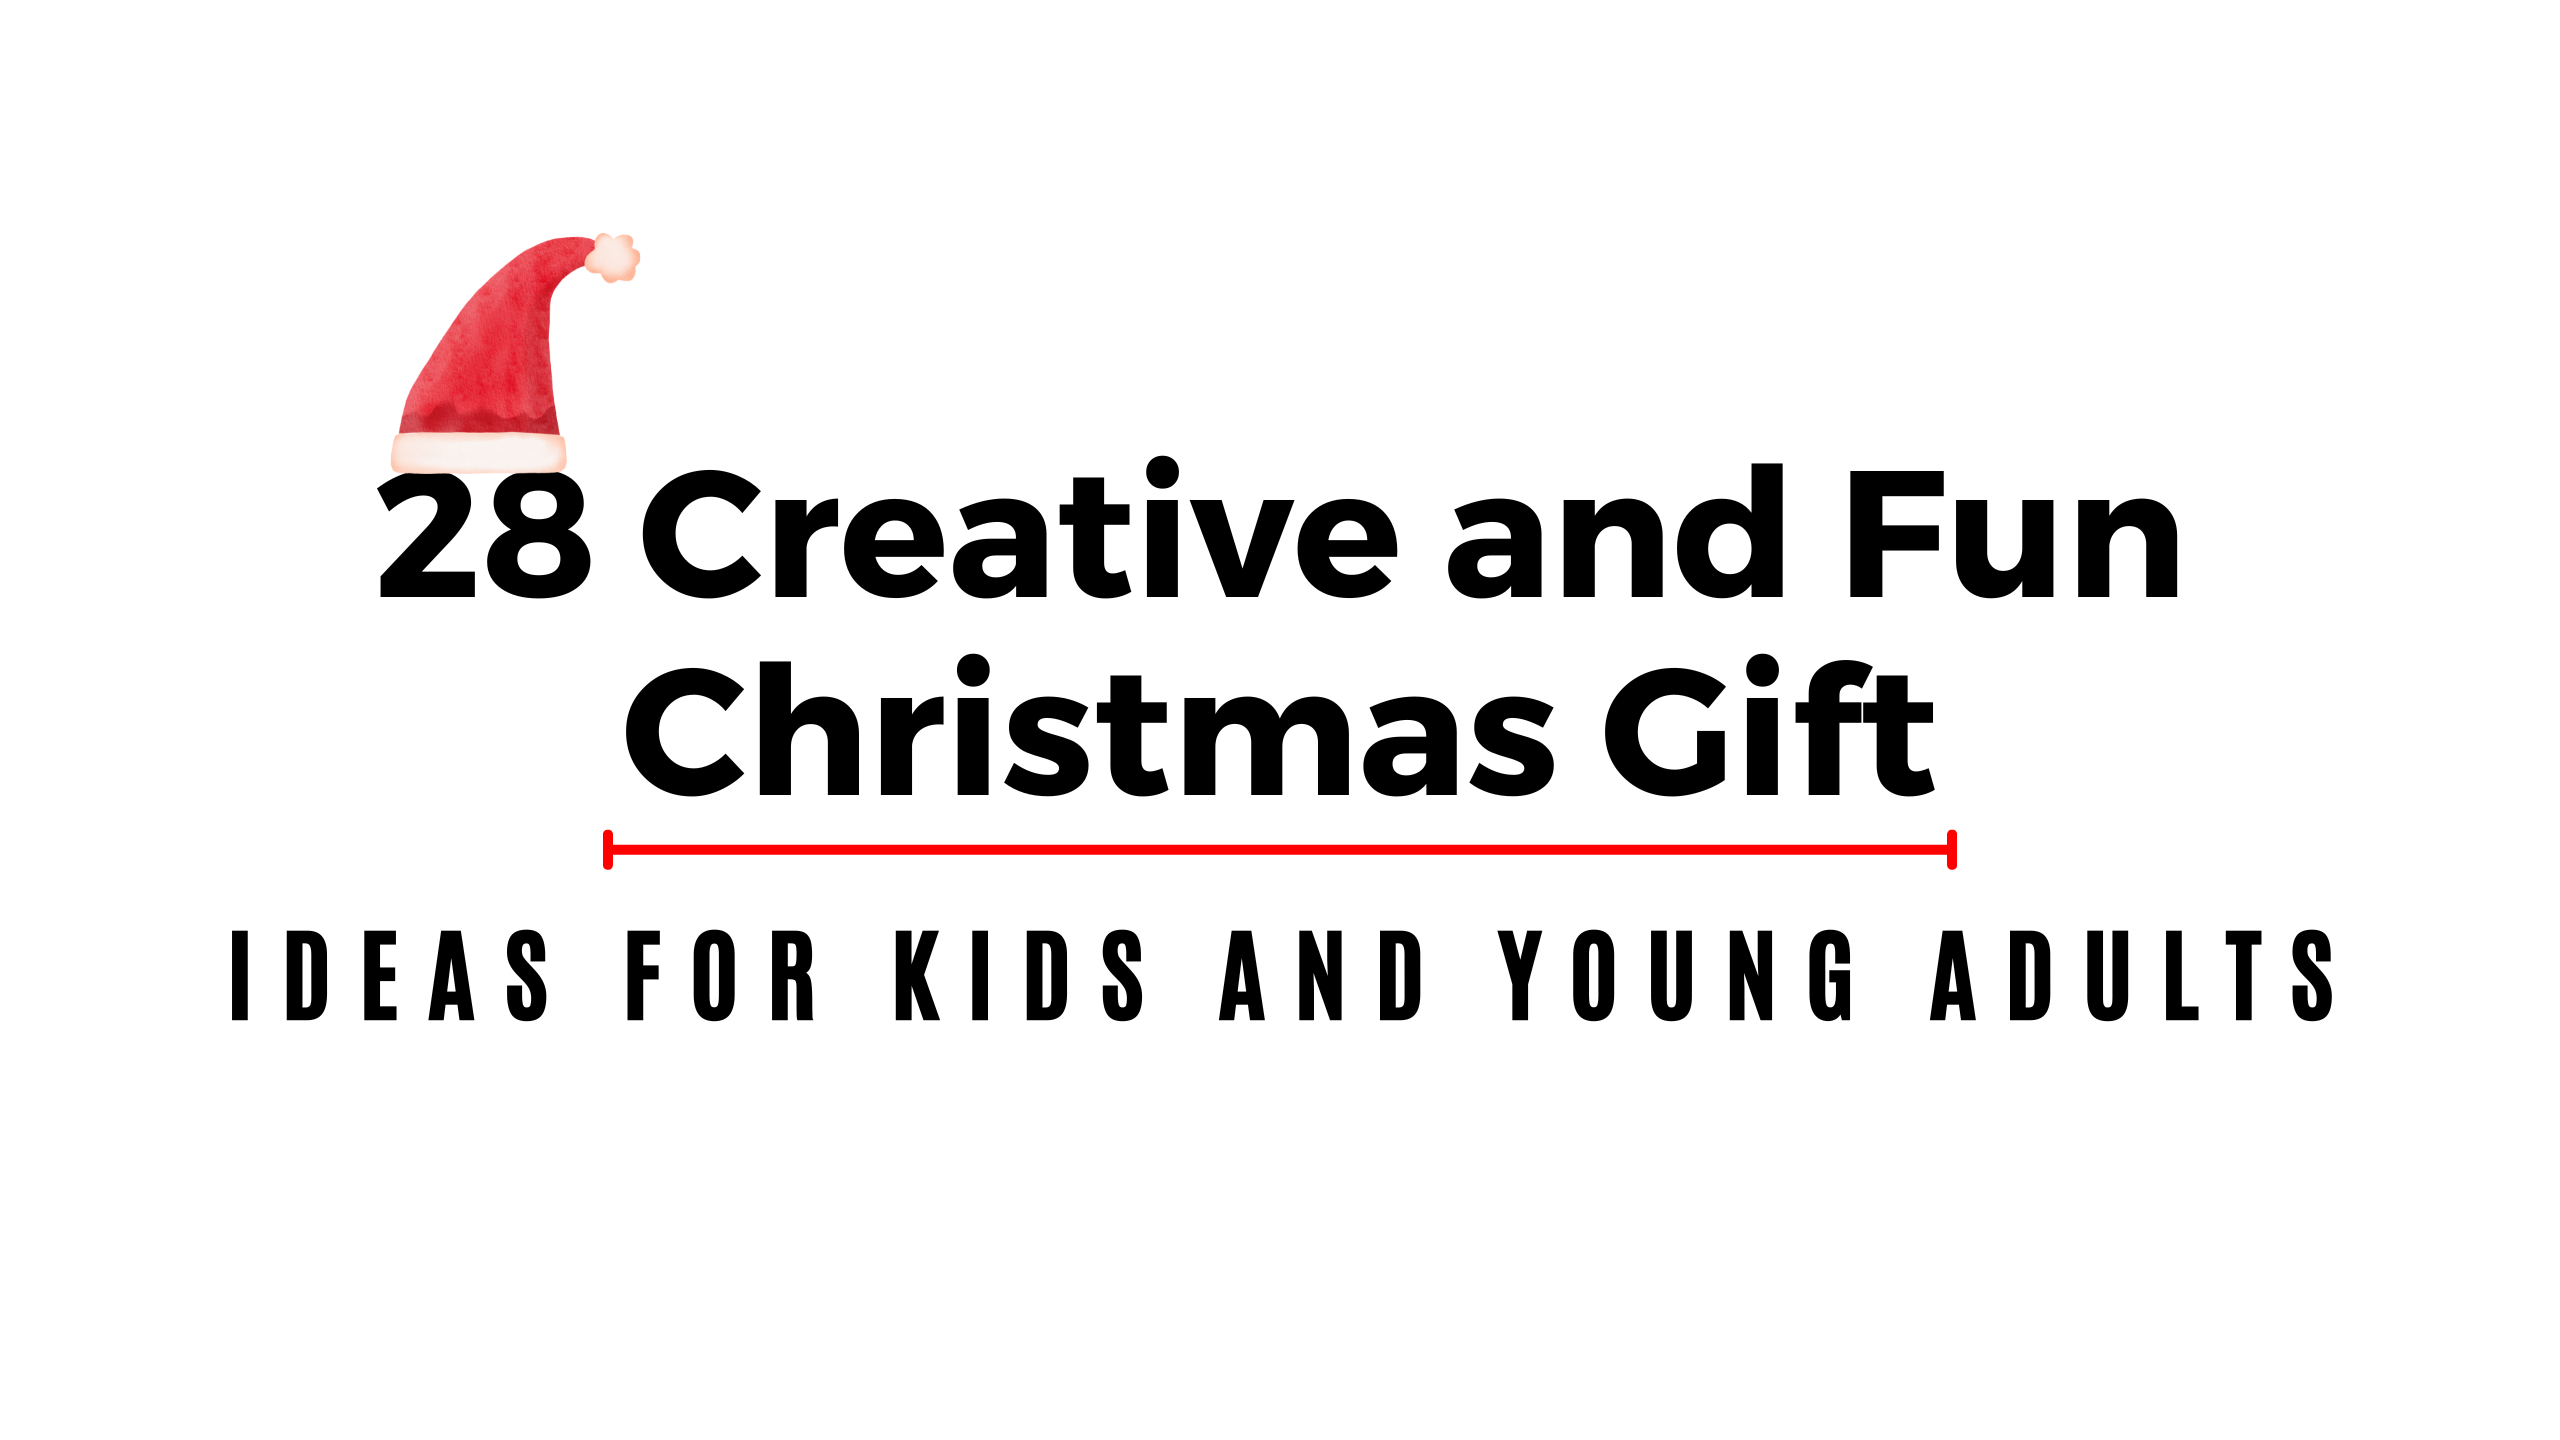 28 Creative Christmas gift ideas for Kids and young adults | Xanta.com